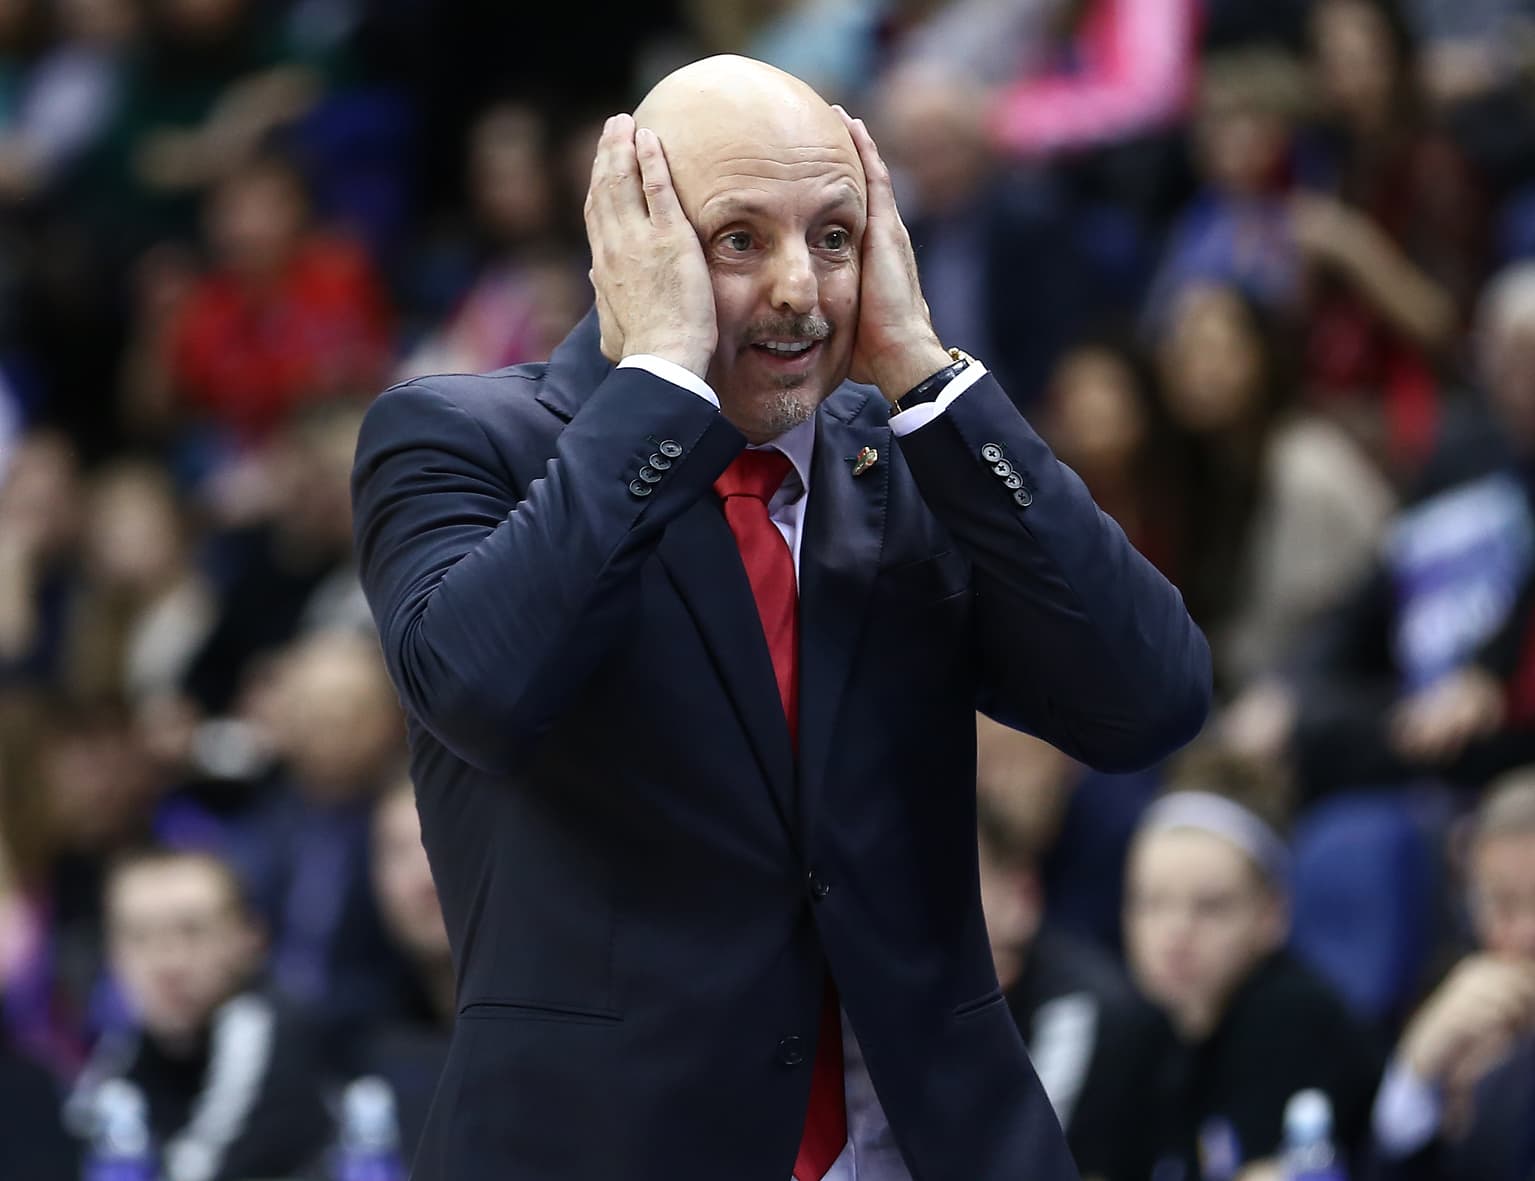 Week In Review: CSKA’s 1st Loss, Kalev’s Upset And Wild Finish In Minsk